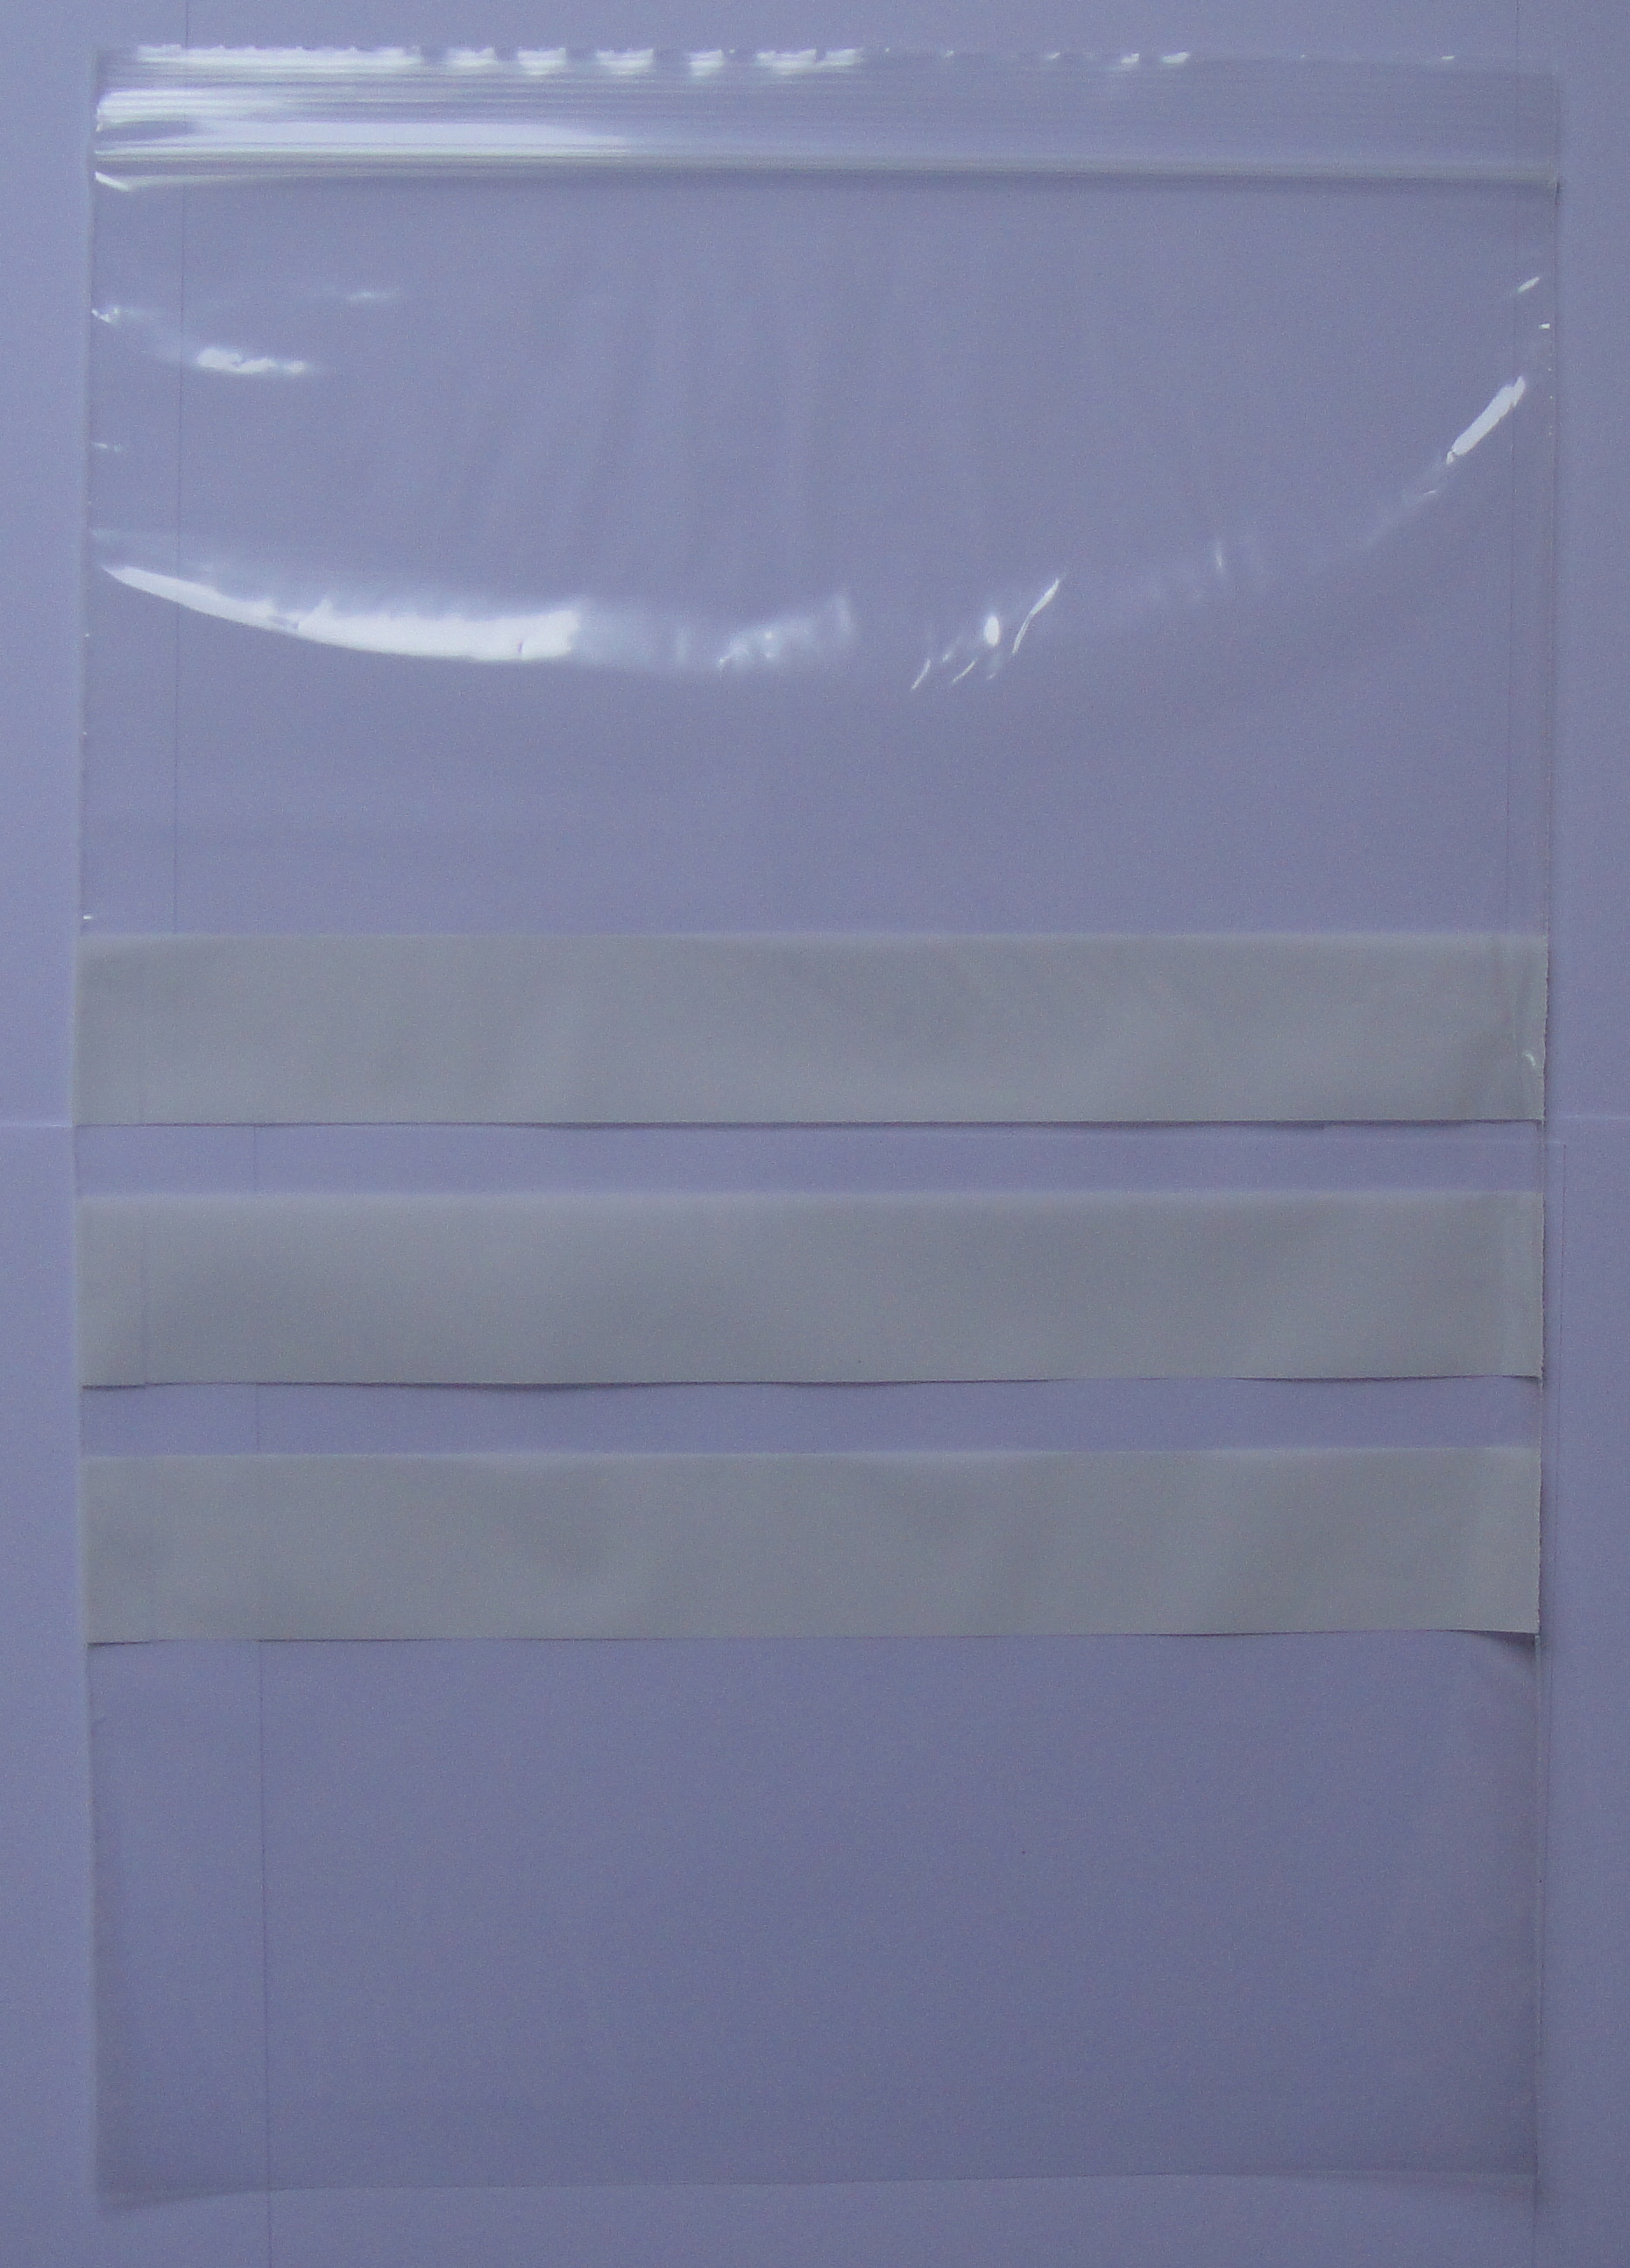 Grip Seal 1000 x 'S bags Resealable Clear Polythene Plastic Bags Quick dispatch 